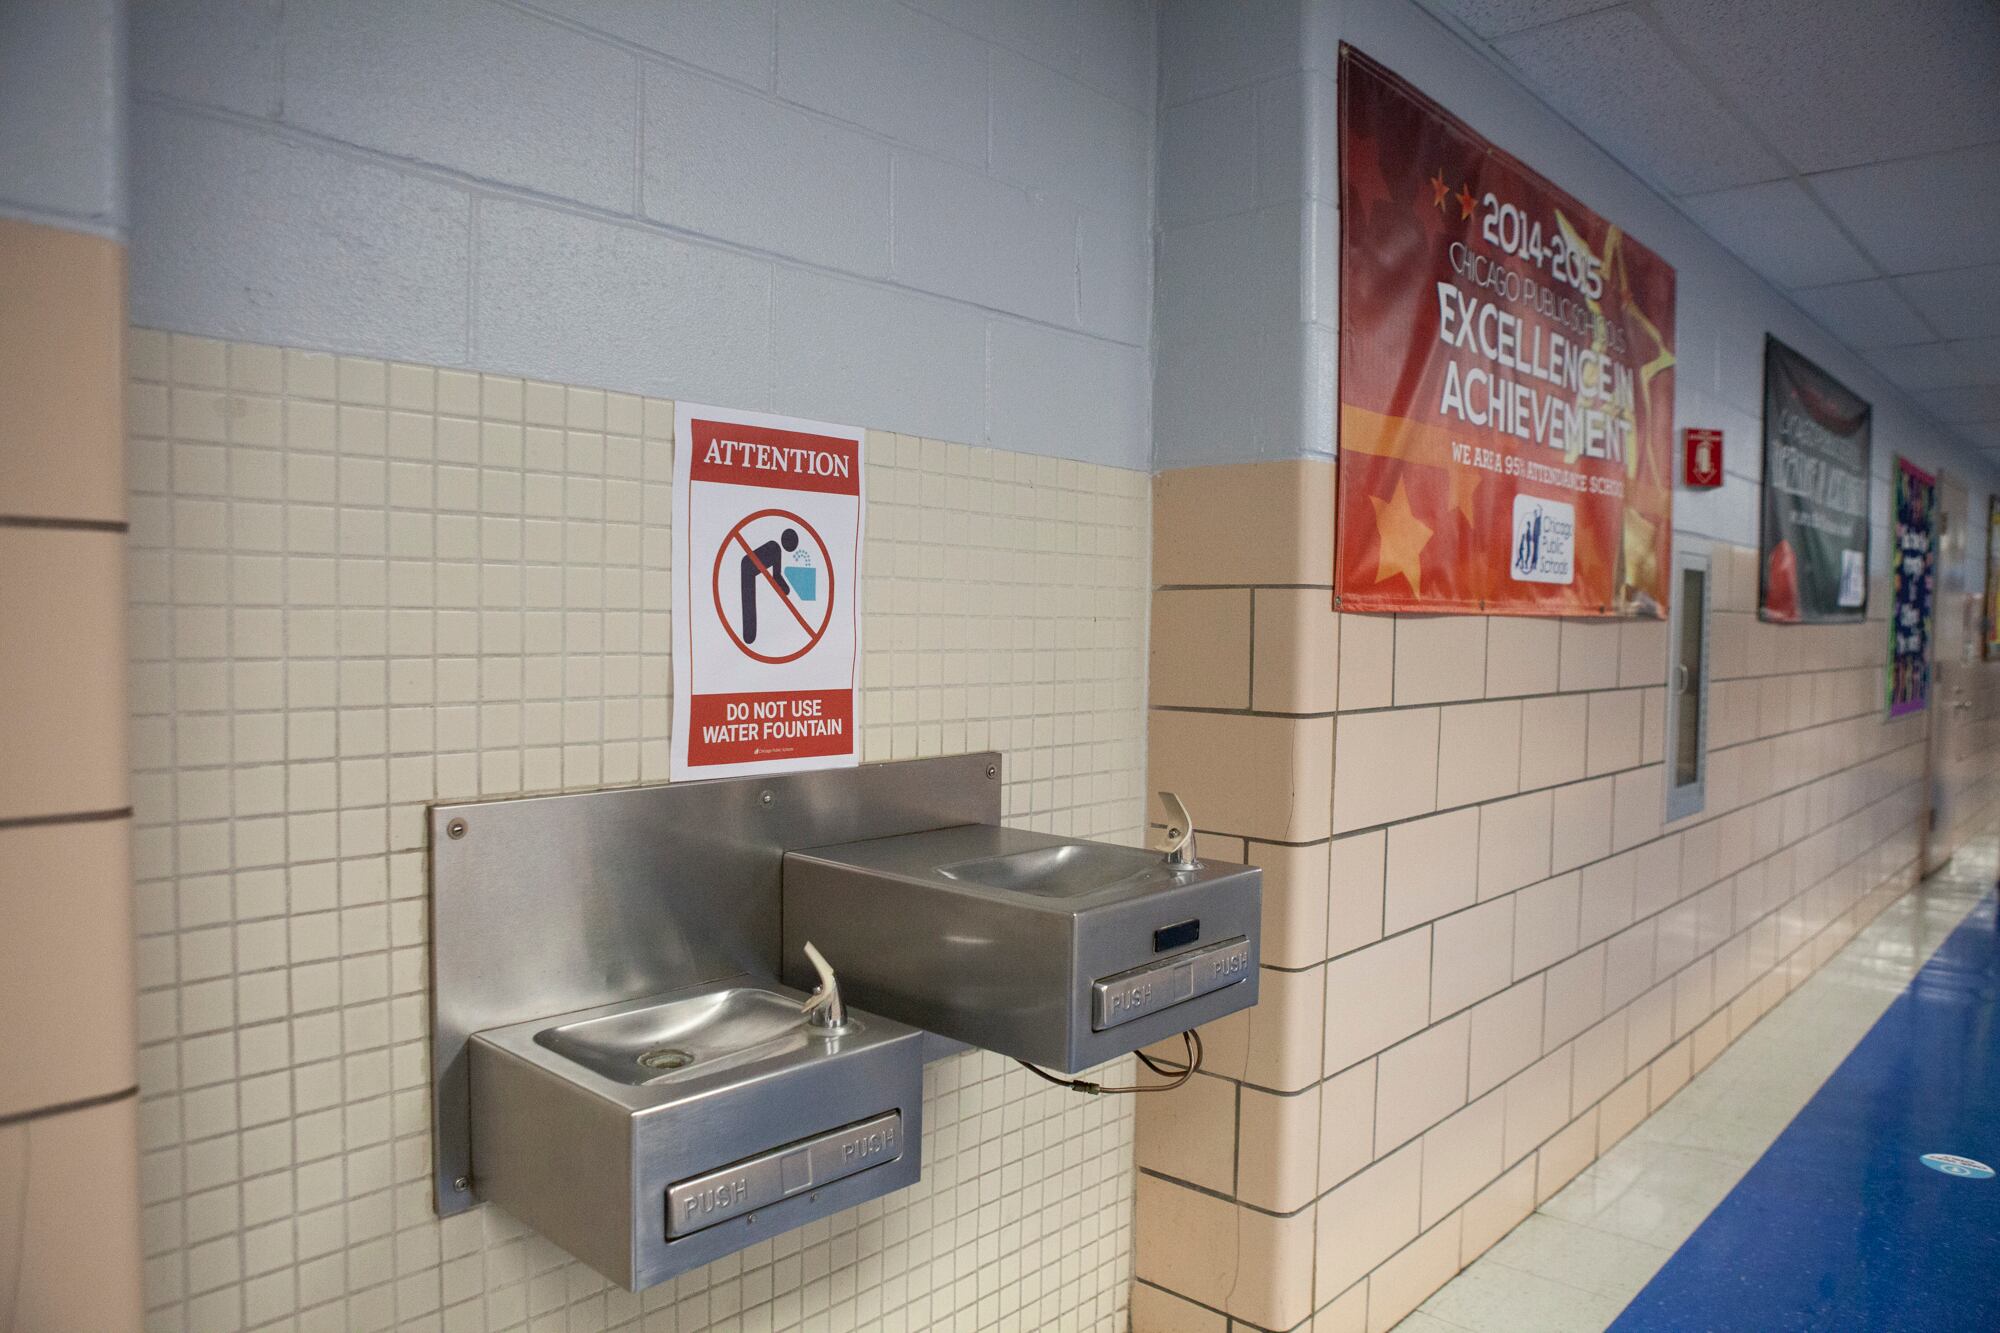 A sign between two water fountains that reads: Attention. Do not use water fountain.